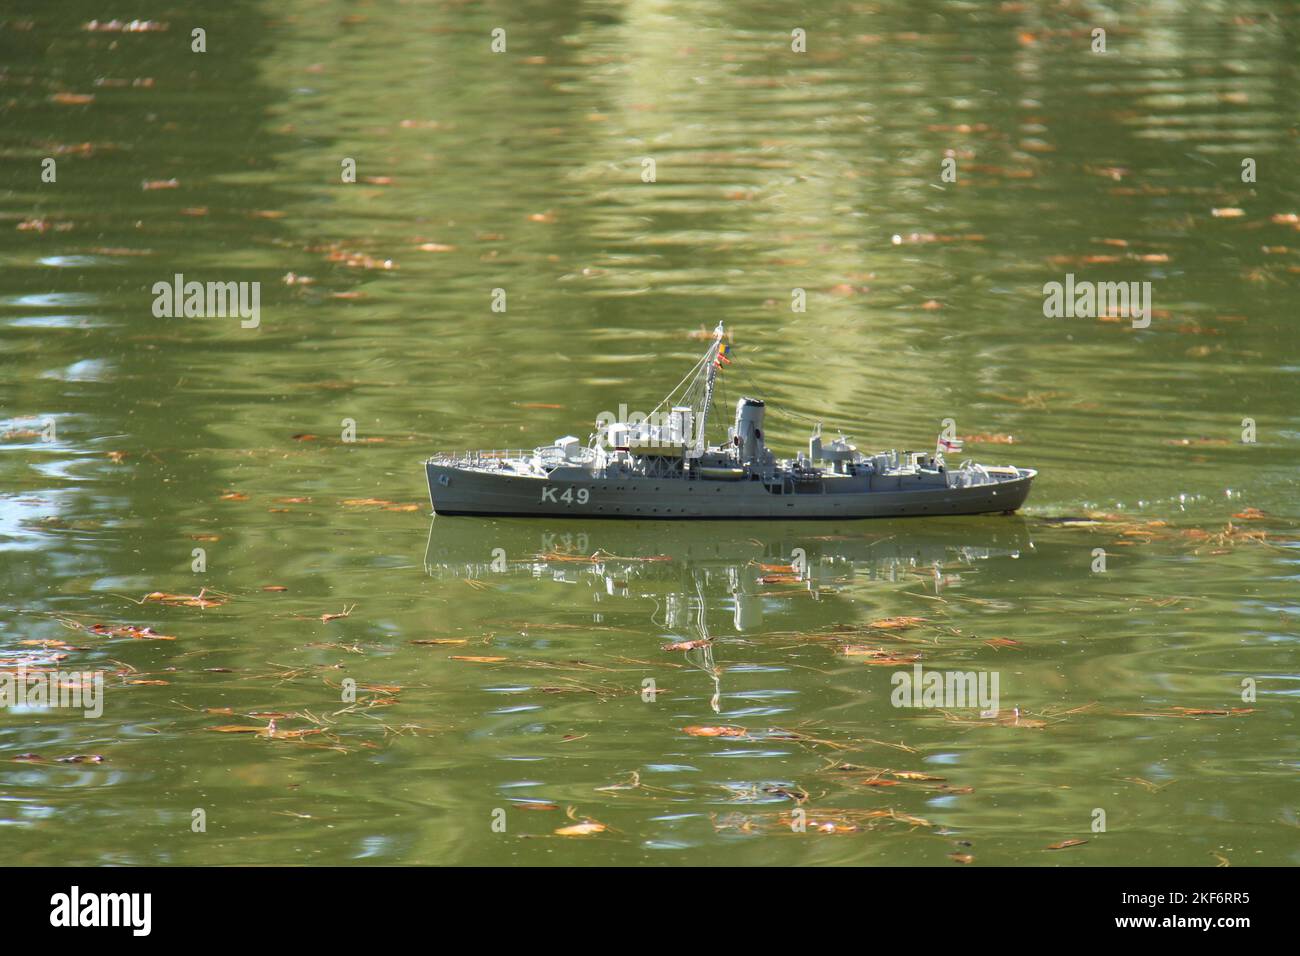 A Radio Controlled Model of a Wartime Fighting Navy Ship. Stock Photo